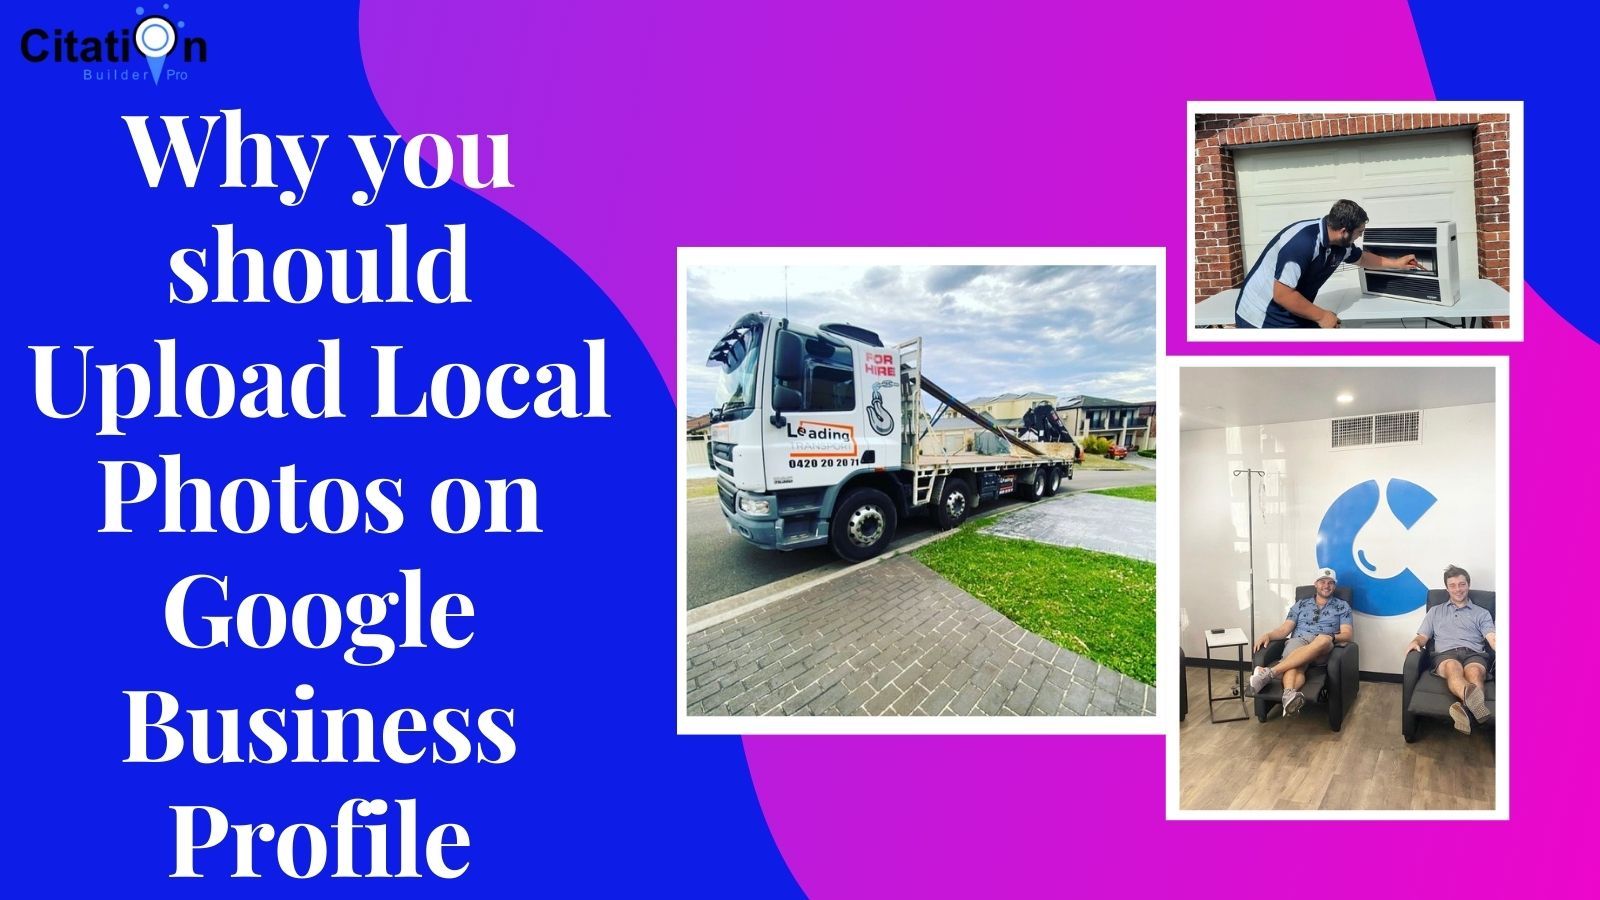 Why-you-should-Upload-Local-Photos-on-Google-Business-Profile